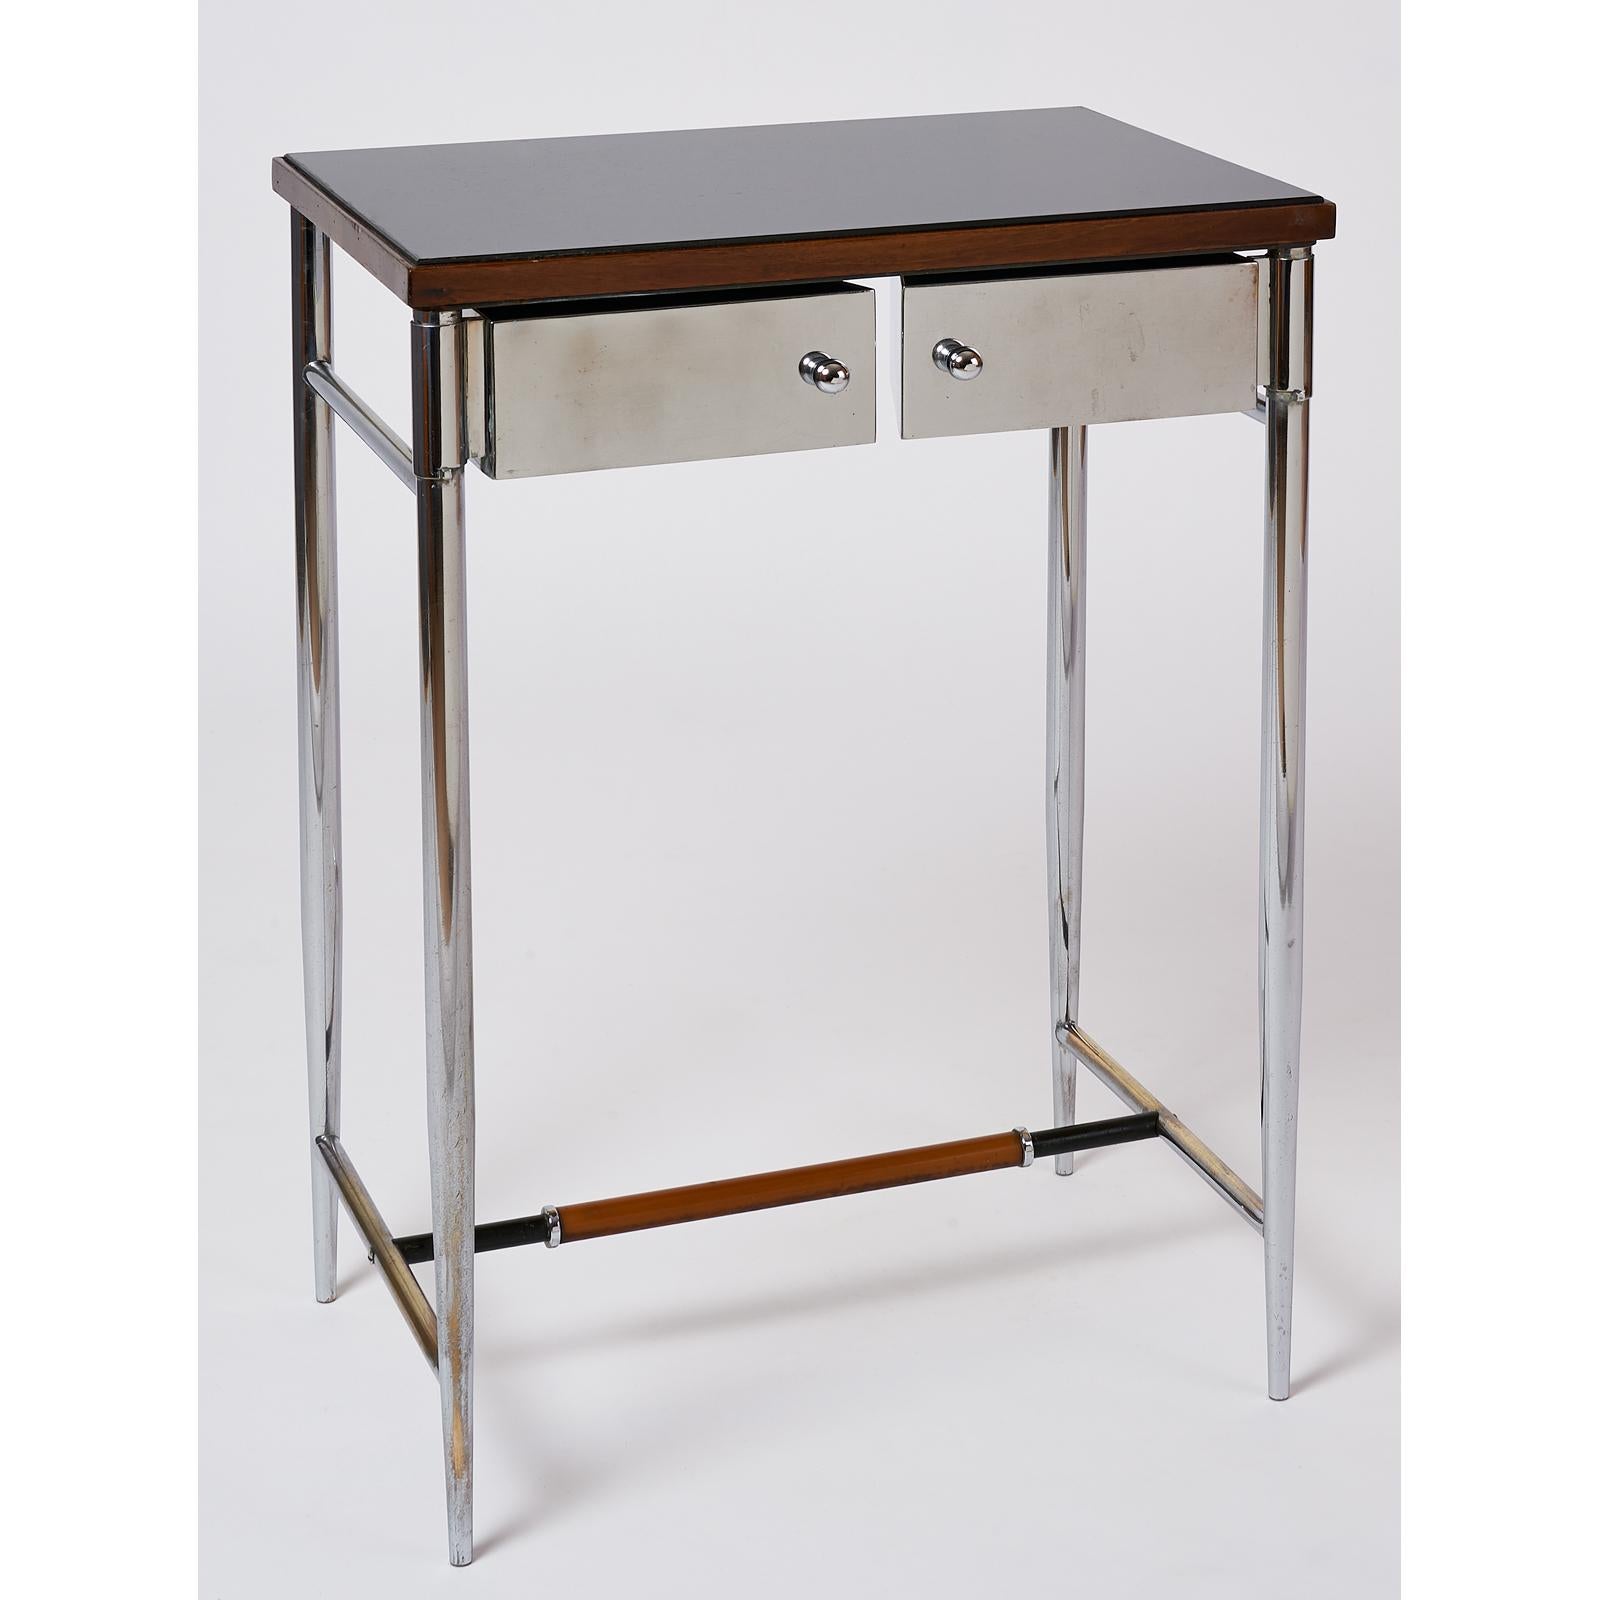 A fine pair of side tables or night stands in chromed metal with wood framed black opaline, glass tops and pivoting drawers, Italy, 1930s. Pair of goose neck lamps for bedside reading may be used or removed.
Measures: 20 W x 14 D x 30 H
Original